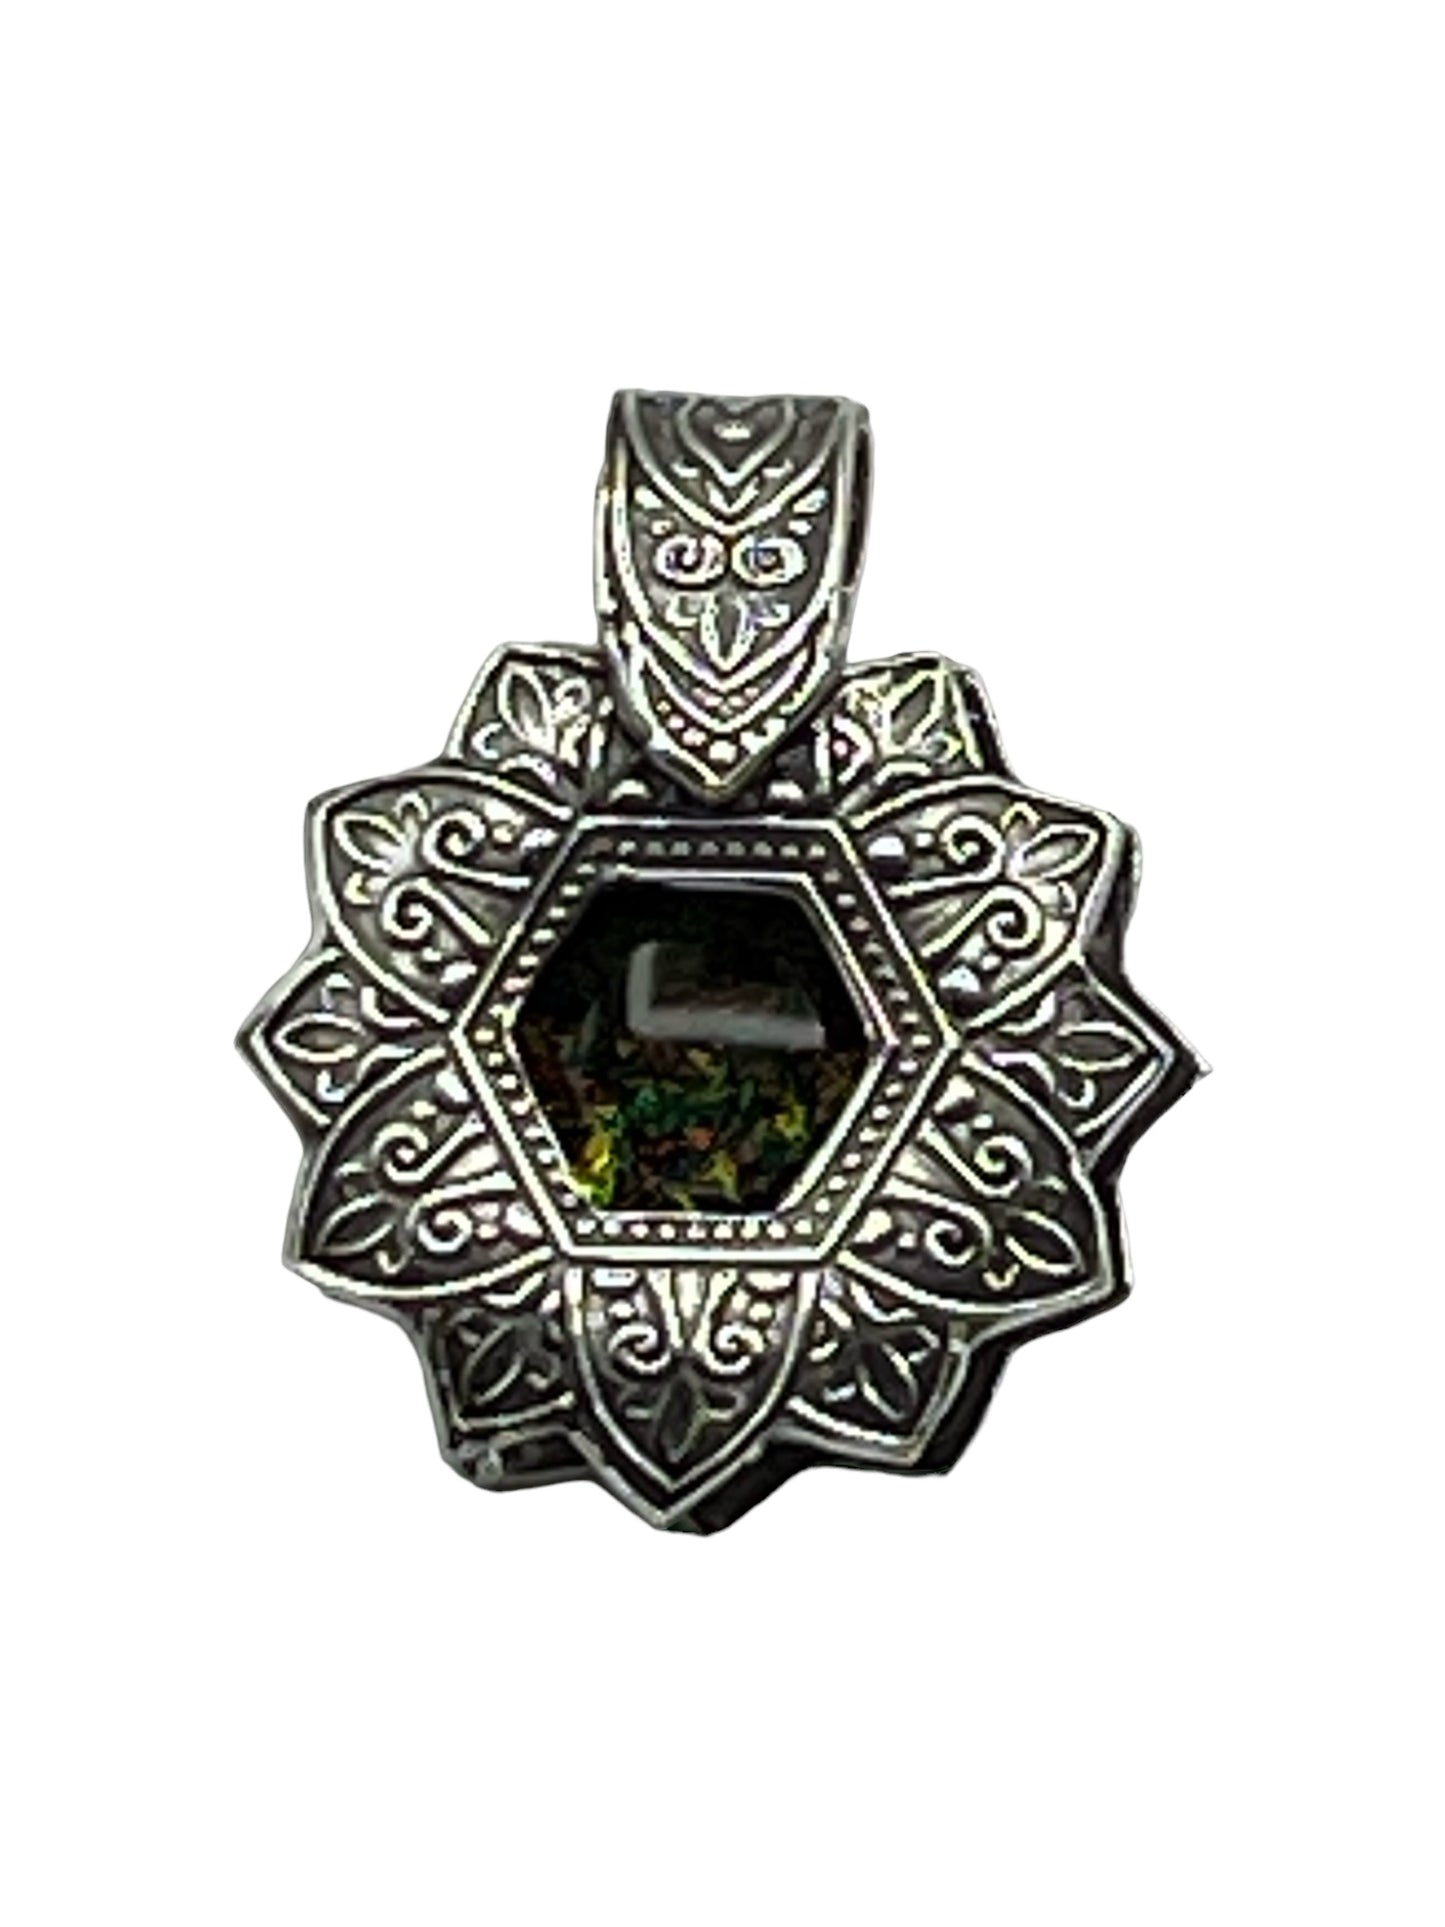 Shadowbox with Large Cabochon .999 Fine Silver Pendant